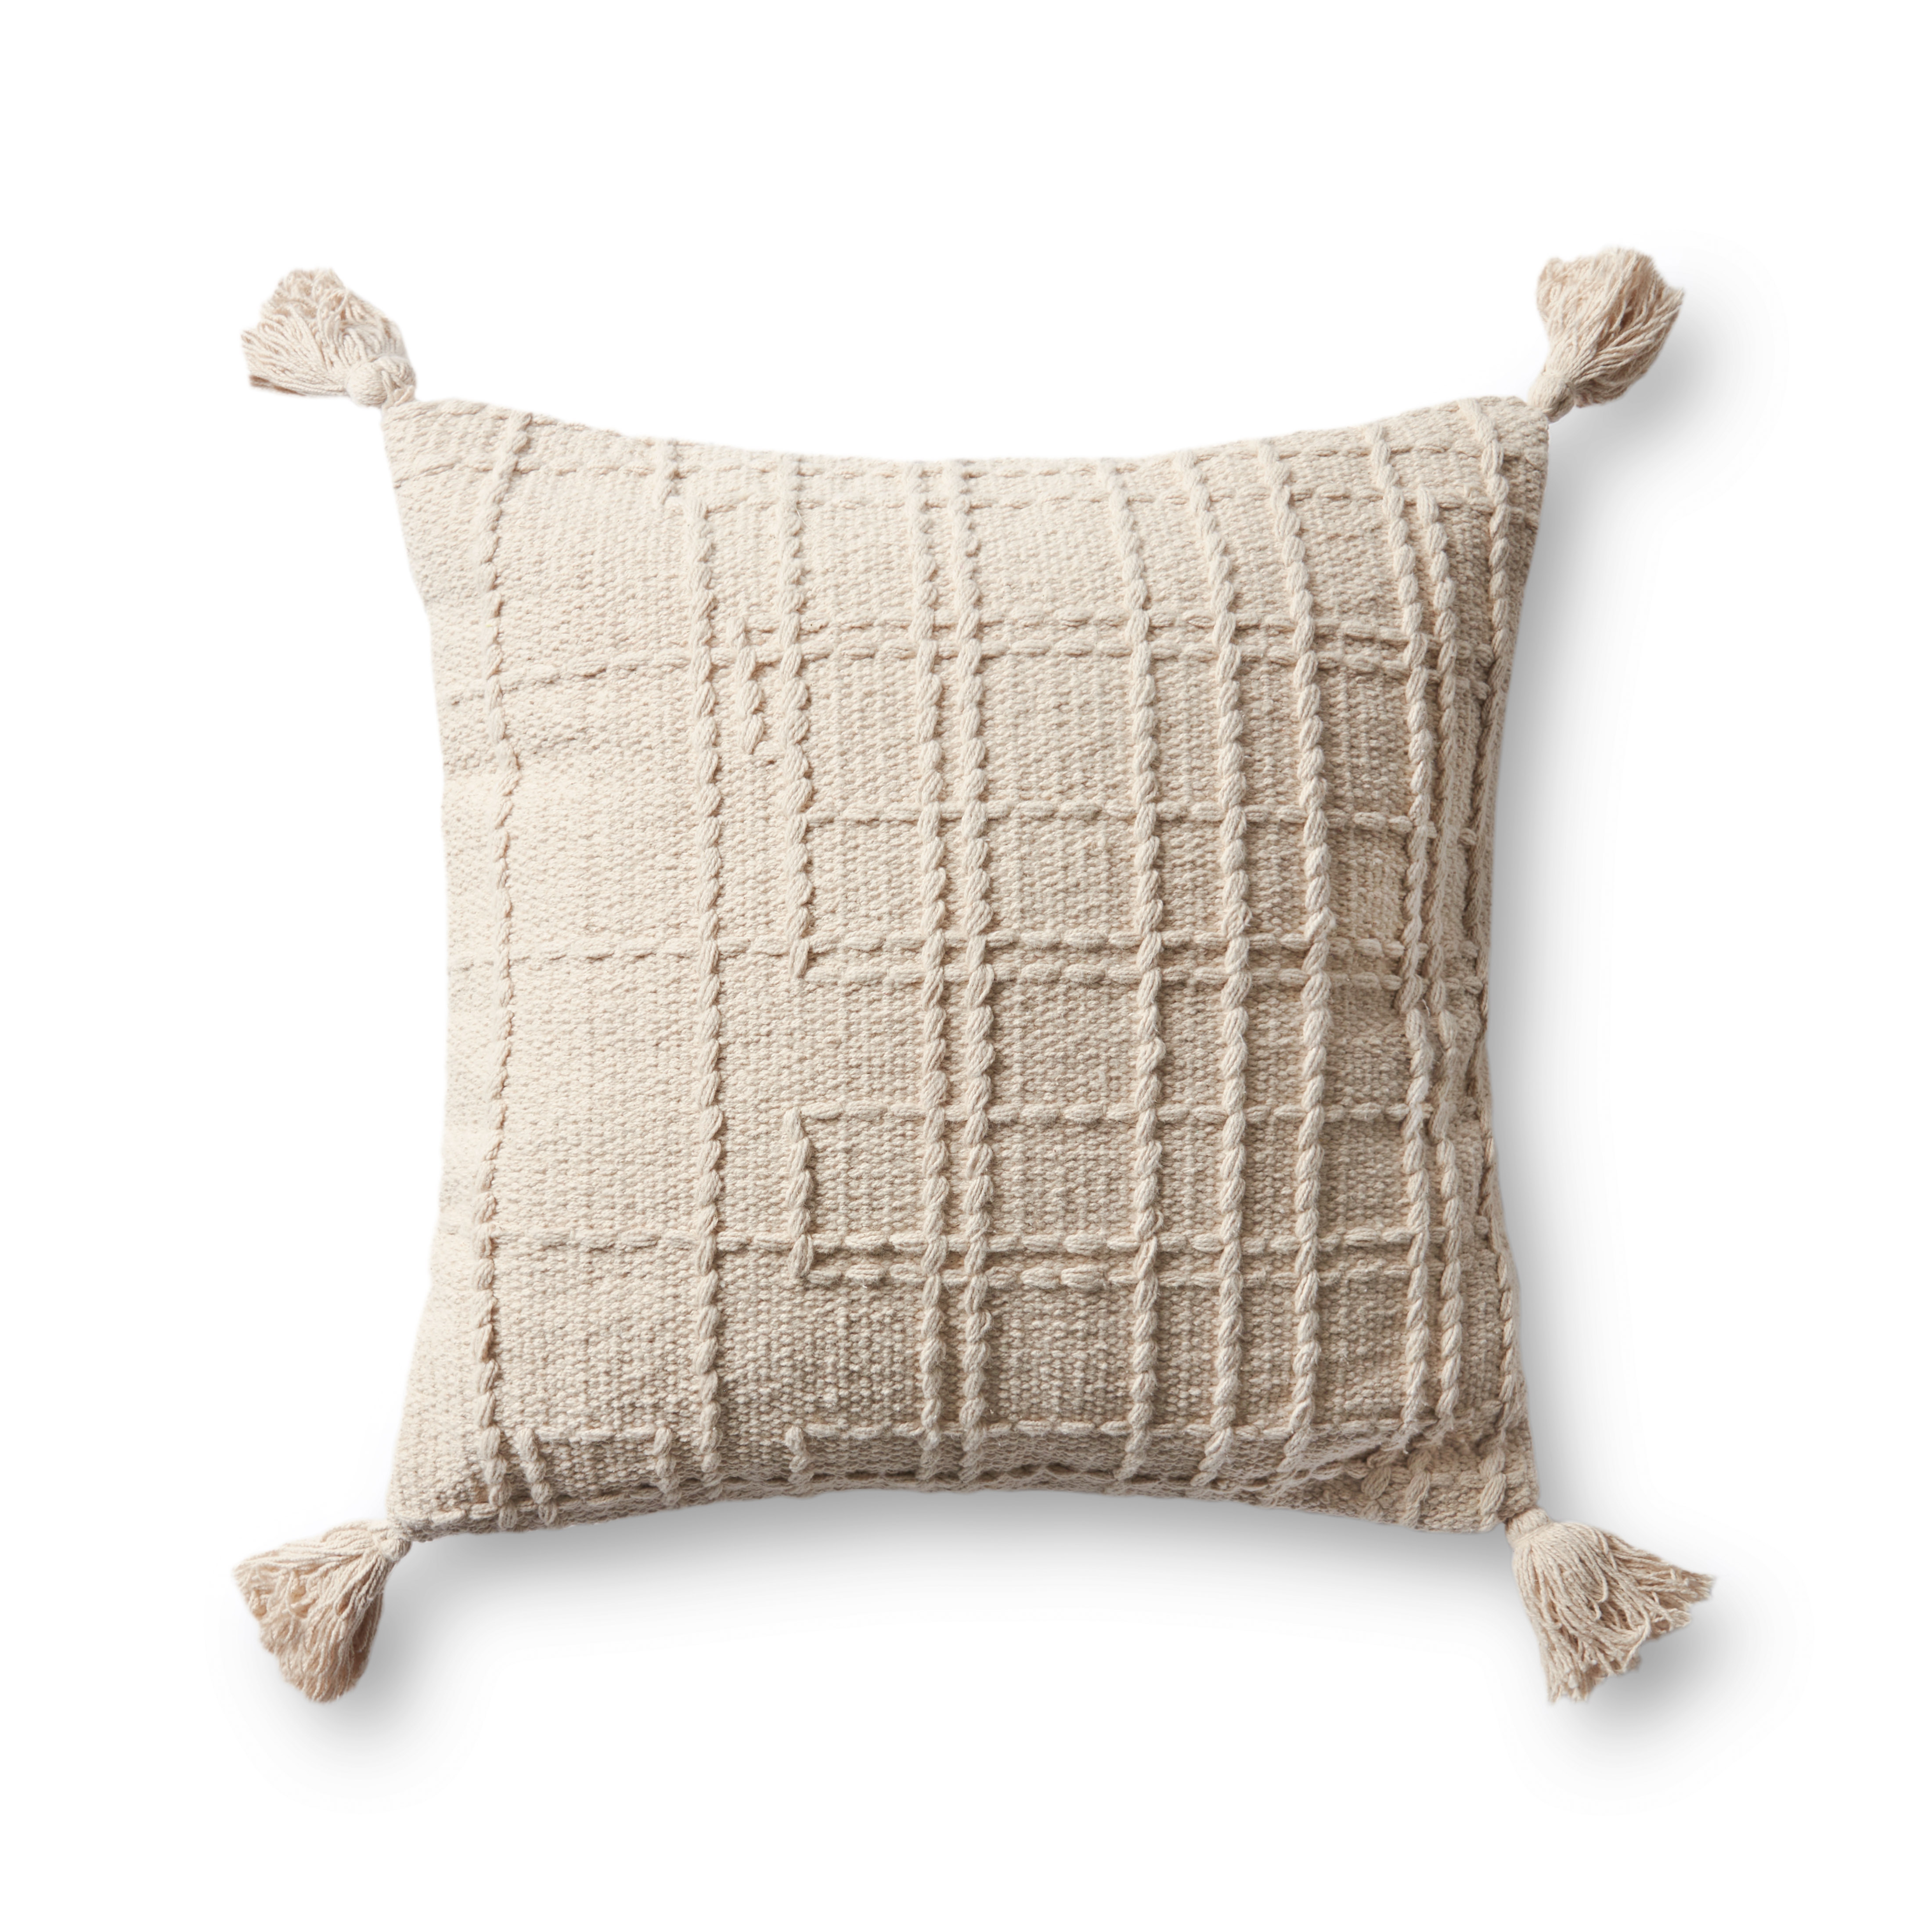 PILLOWS PMH0004 NATURAL 18" x 18" Cover w/Down - Magnolia Home by Joana Gaines Crafted by Loloi Rugs